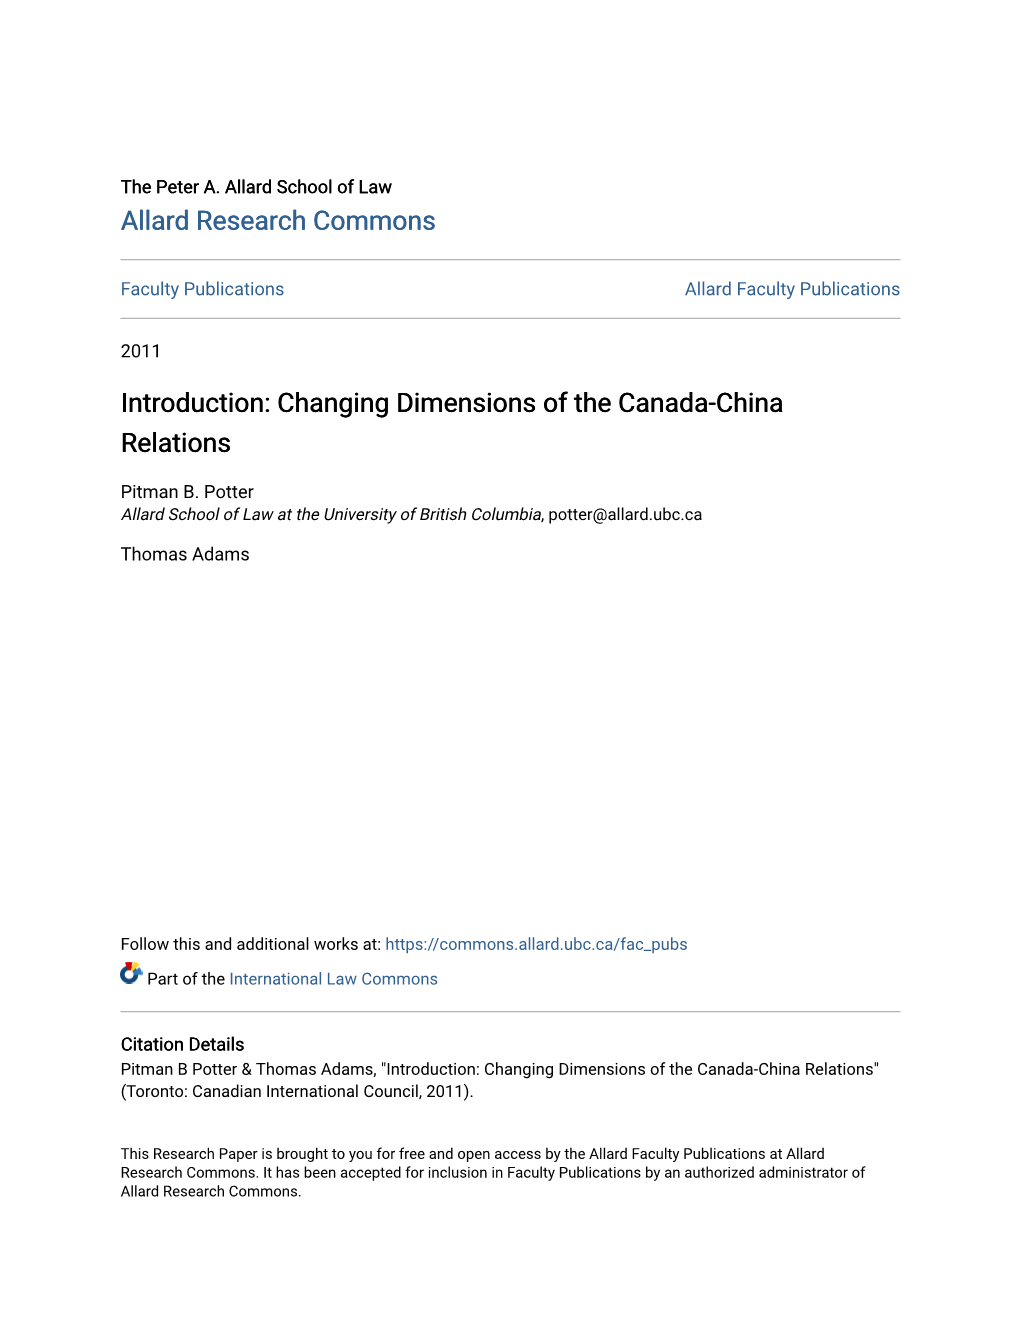 Changing Dimensions of the Canada-China Relations